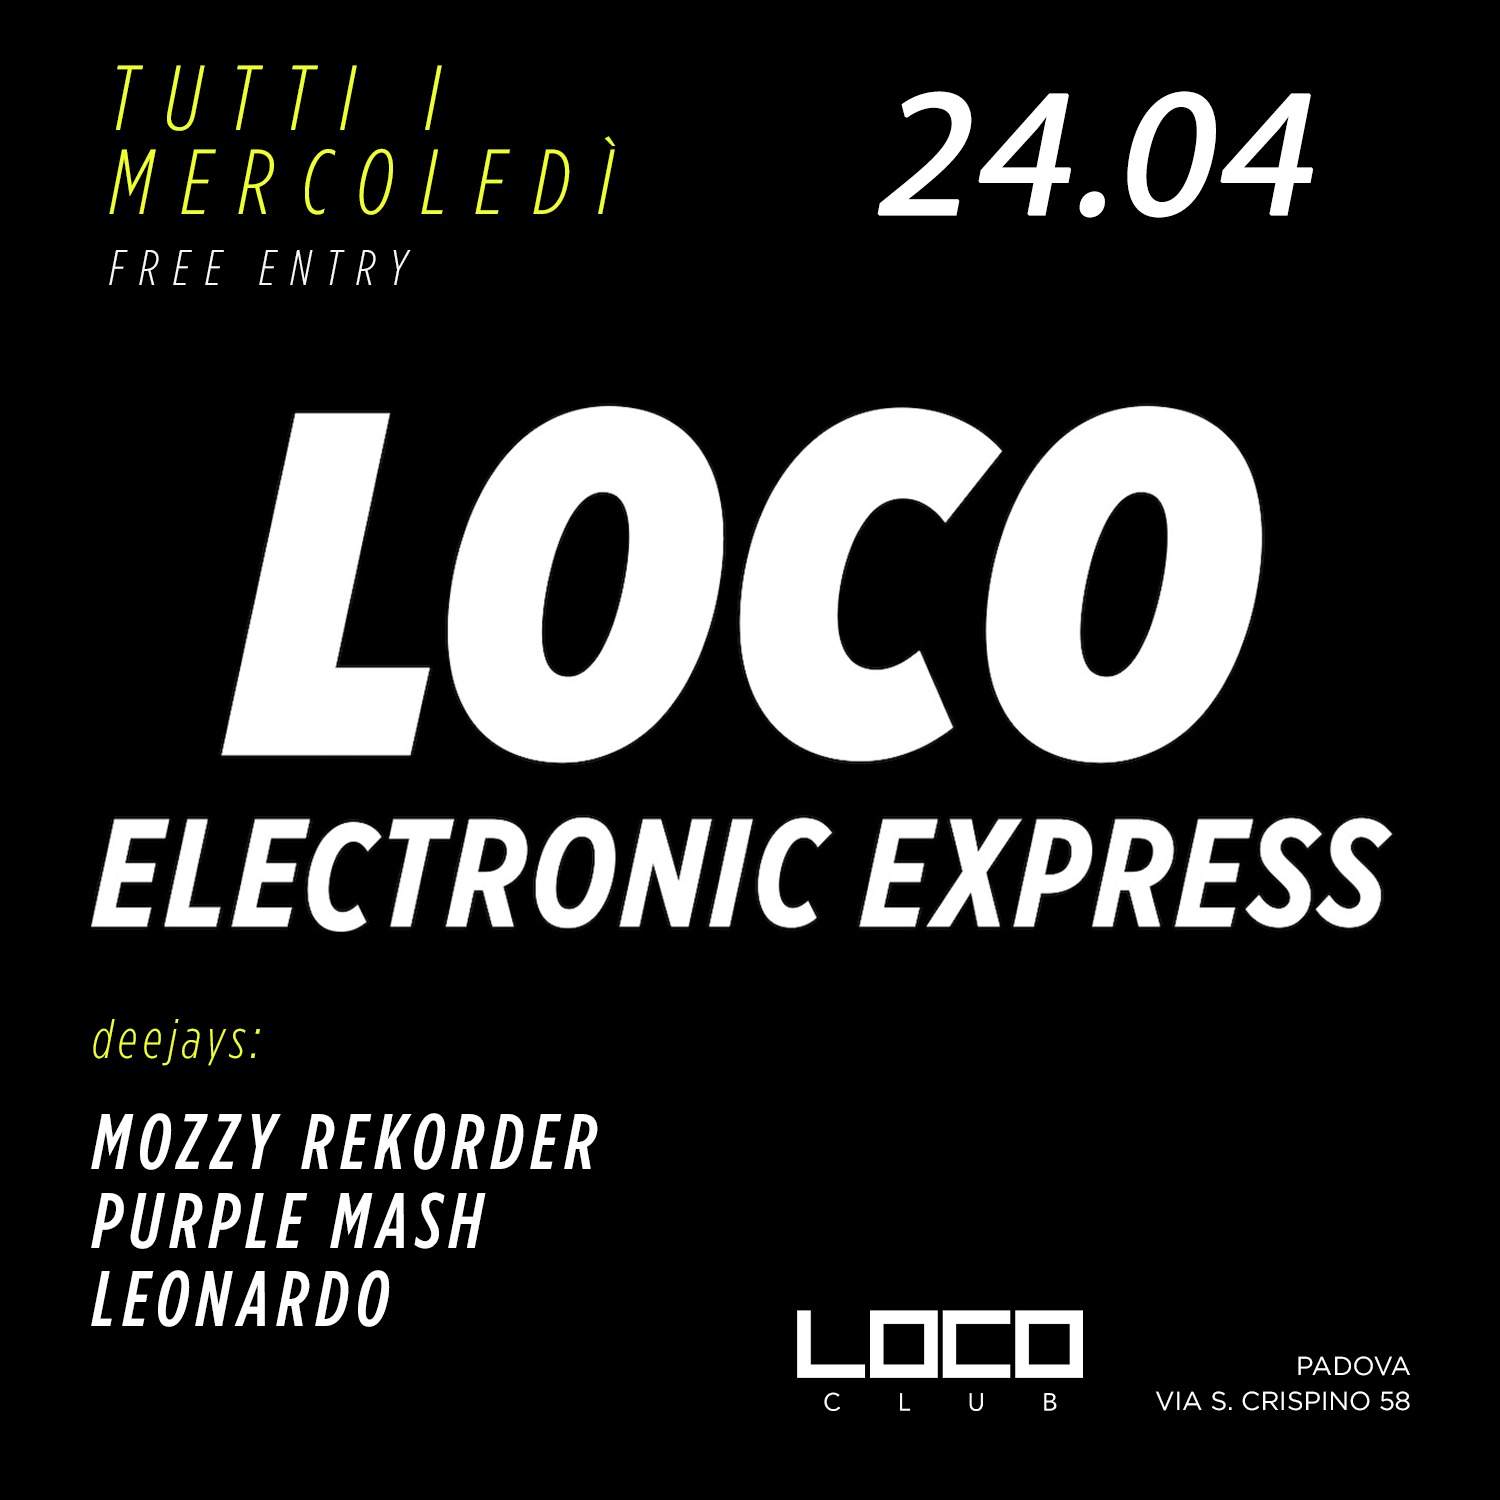 Loco Electronic Express with Mozzy Rekorder, Purple Mash - フライヤー表